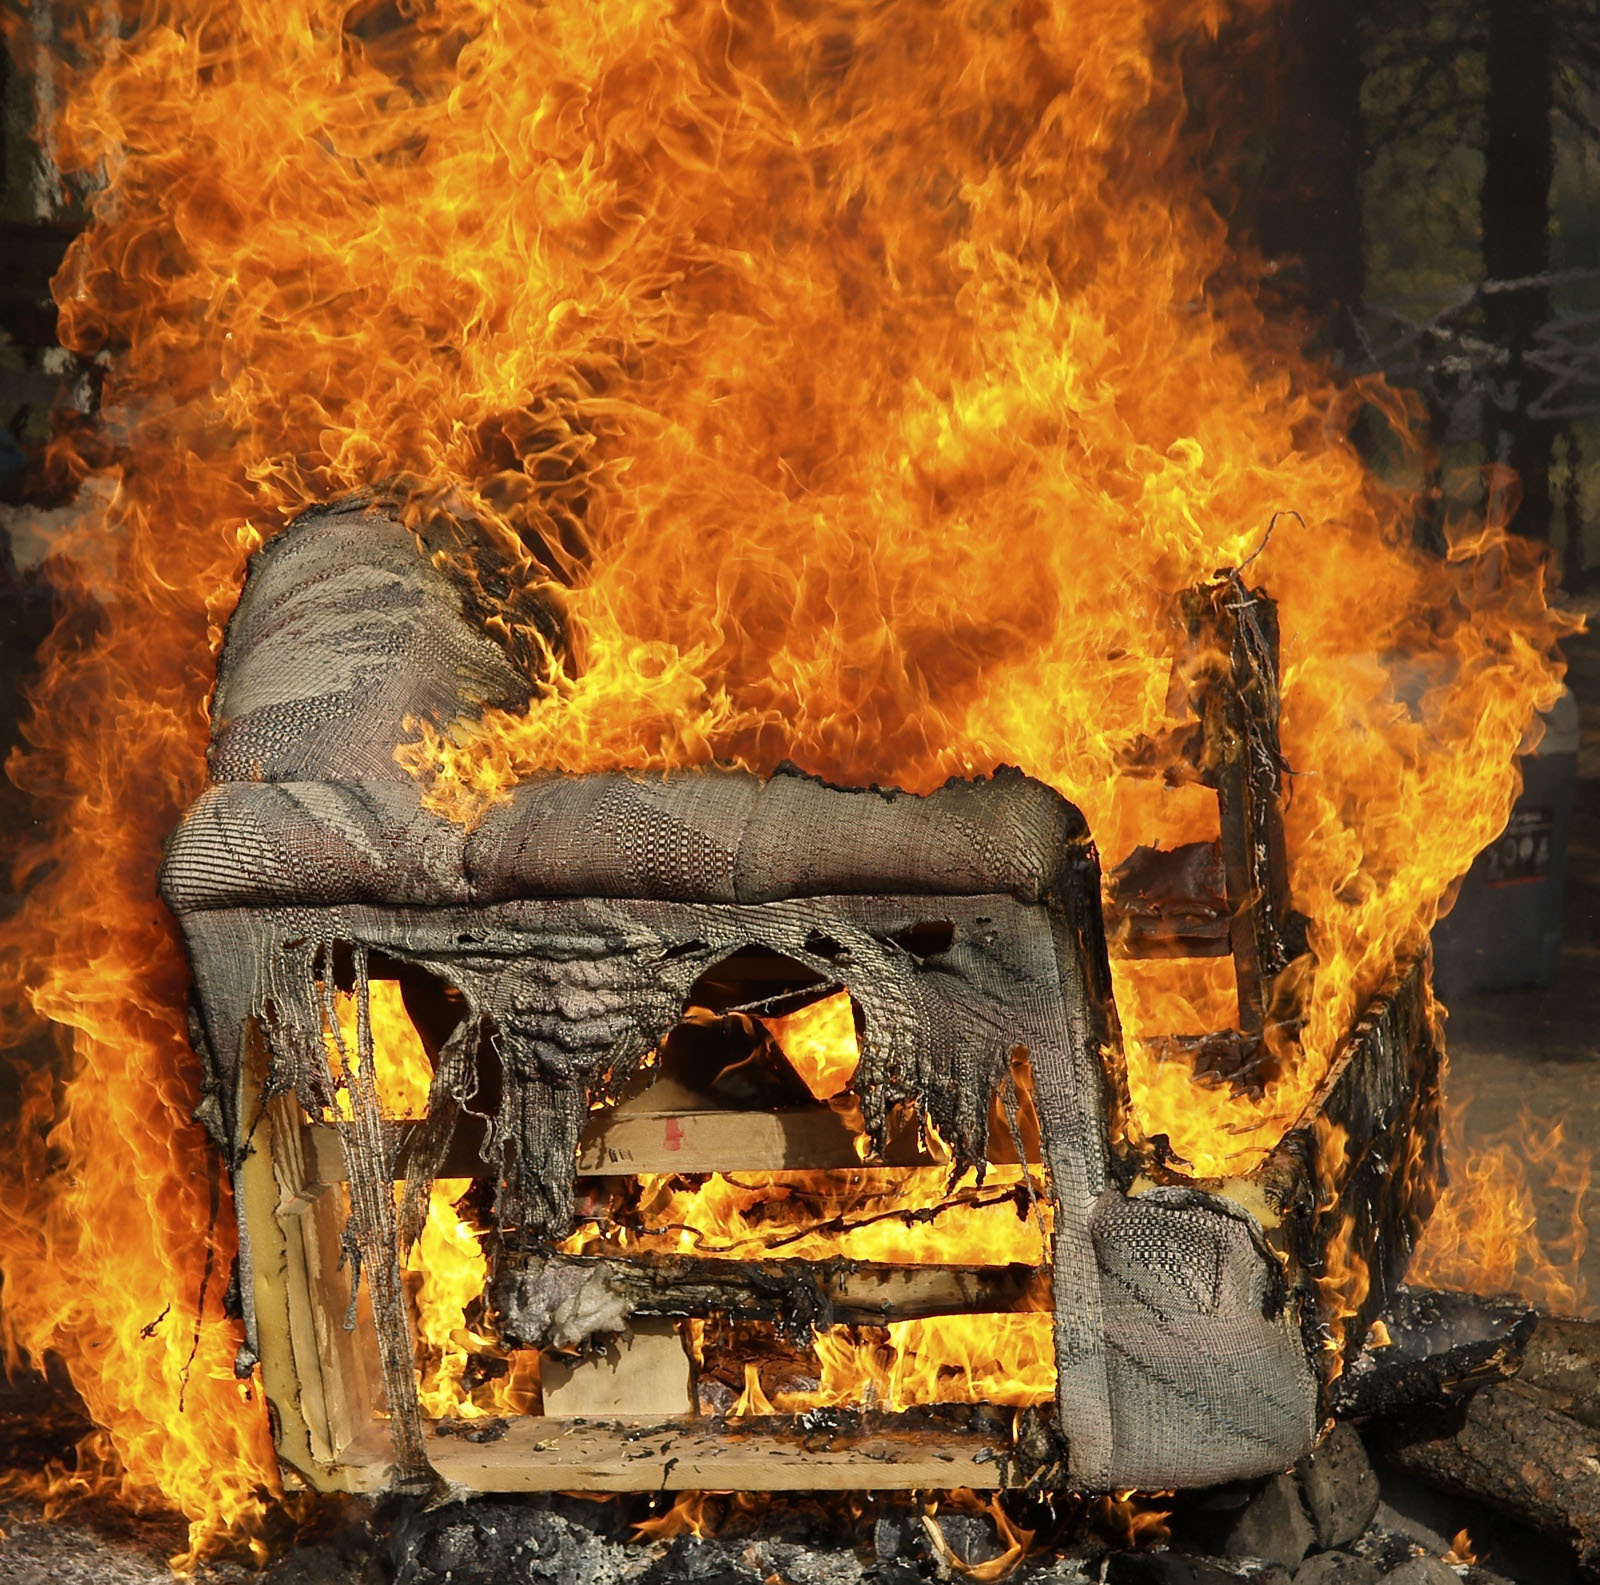 Couch on fire. Photo credit: Timothy Epp / Shutterstock